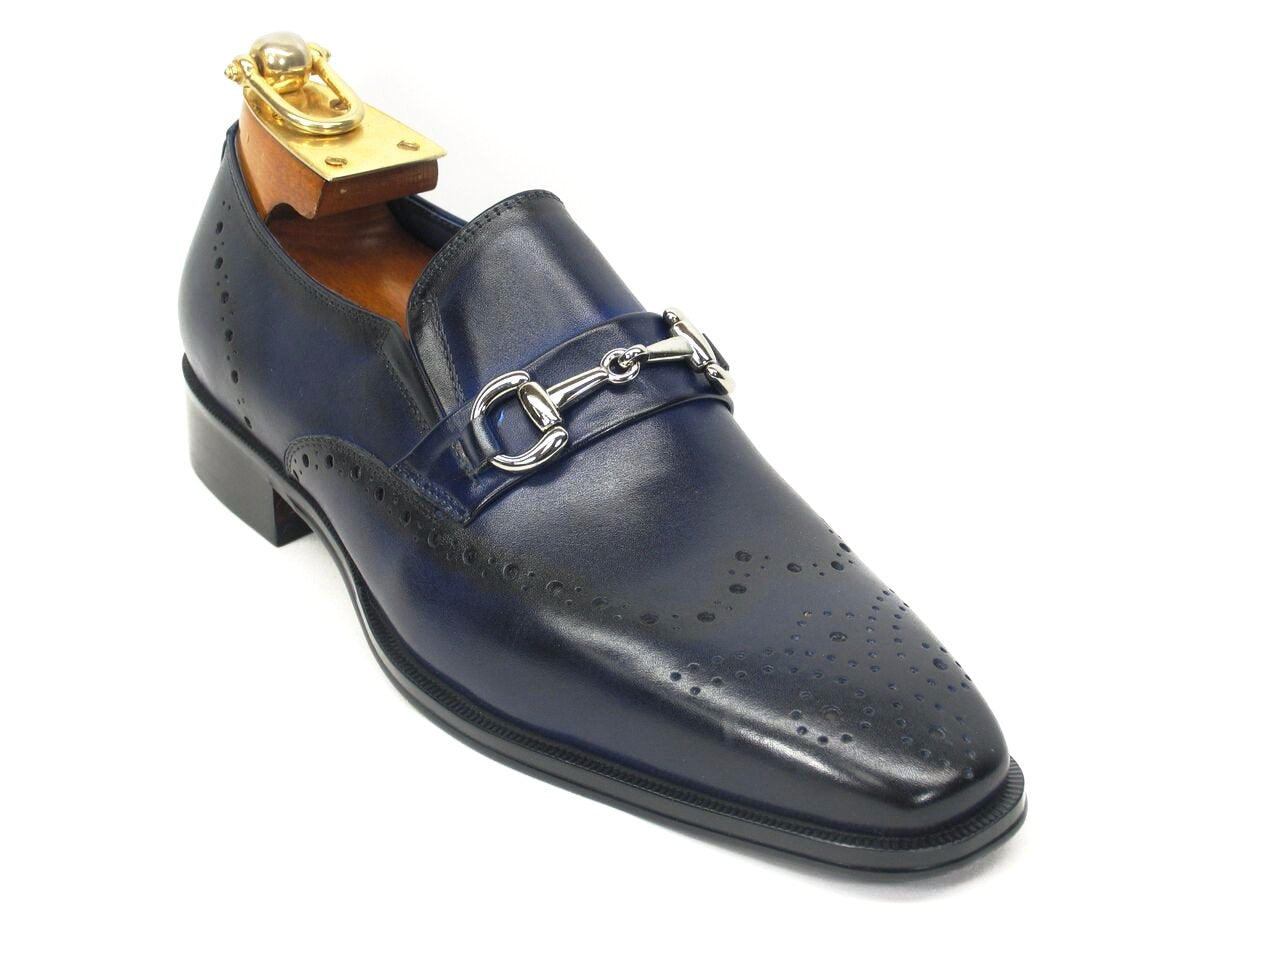 KS261-04 Wholecut Two Tone Buckle Loafer